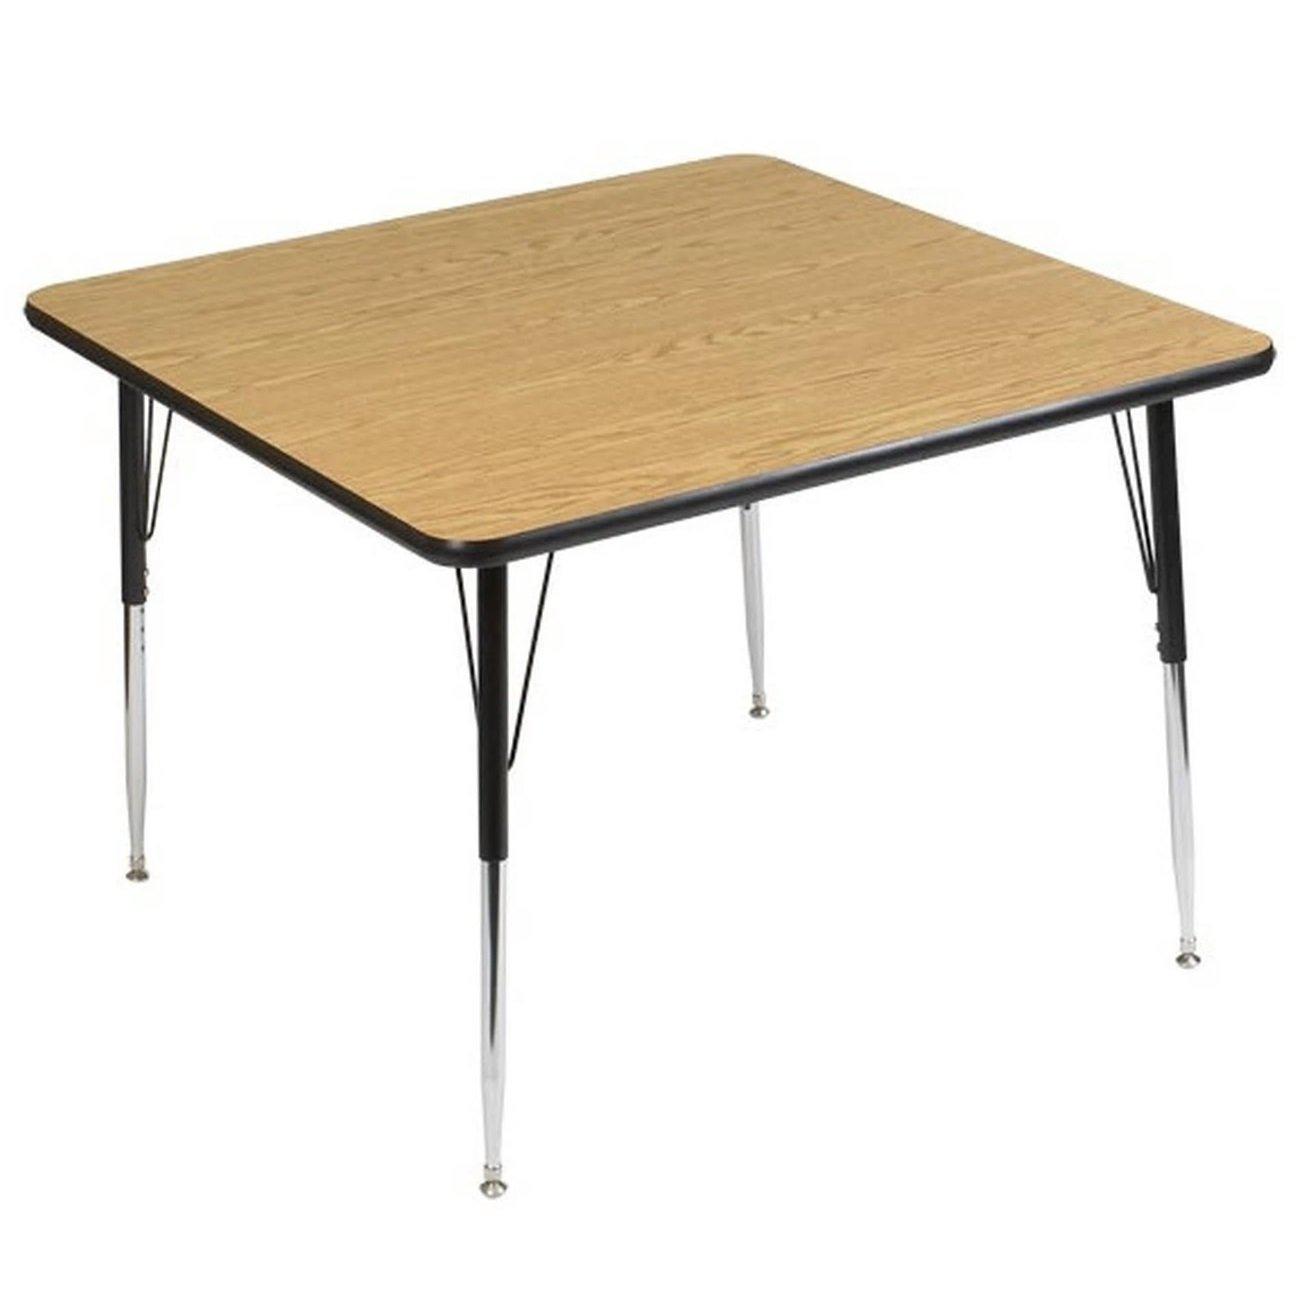 Workhorse Series Adjustable Height Activity Table with High-Pressure Laminate Top, 36" Square